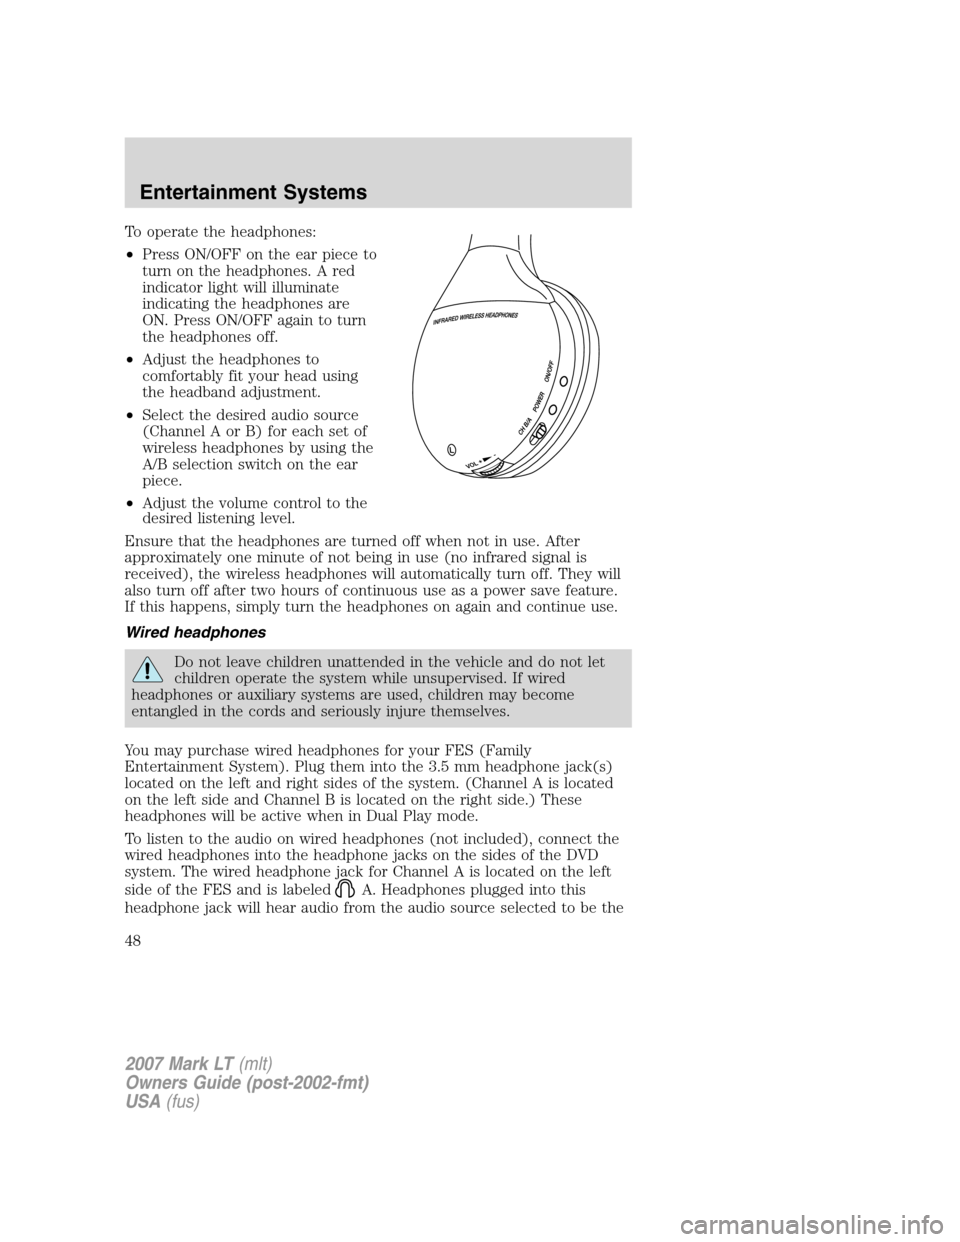 LINCOLN MARK LT 2007 Service Manual To operate the headphones:
•Press ON/OFF on the ear piece to
turn on the headphones. A red
indicator light will illuminate
indicating the headphones are
ON. Press ON/OFF again to turn
the headphones